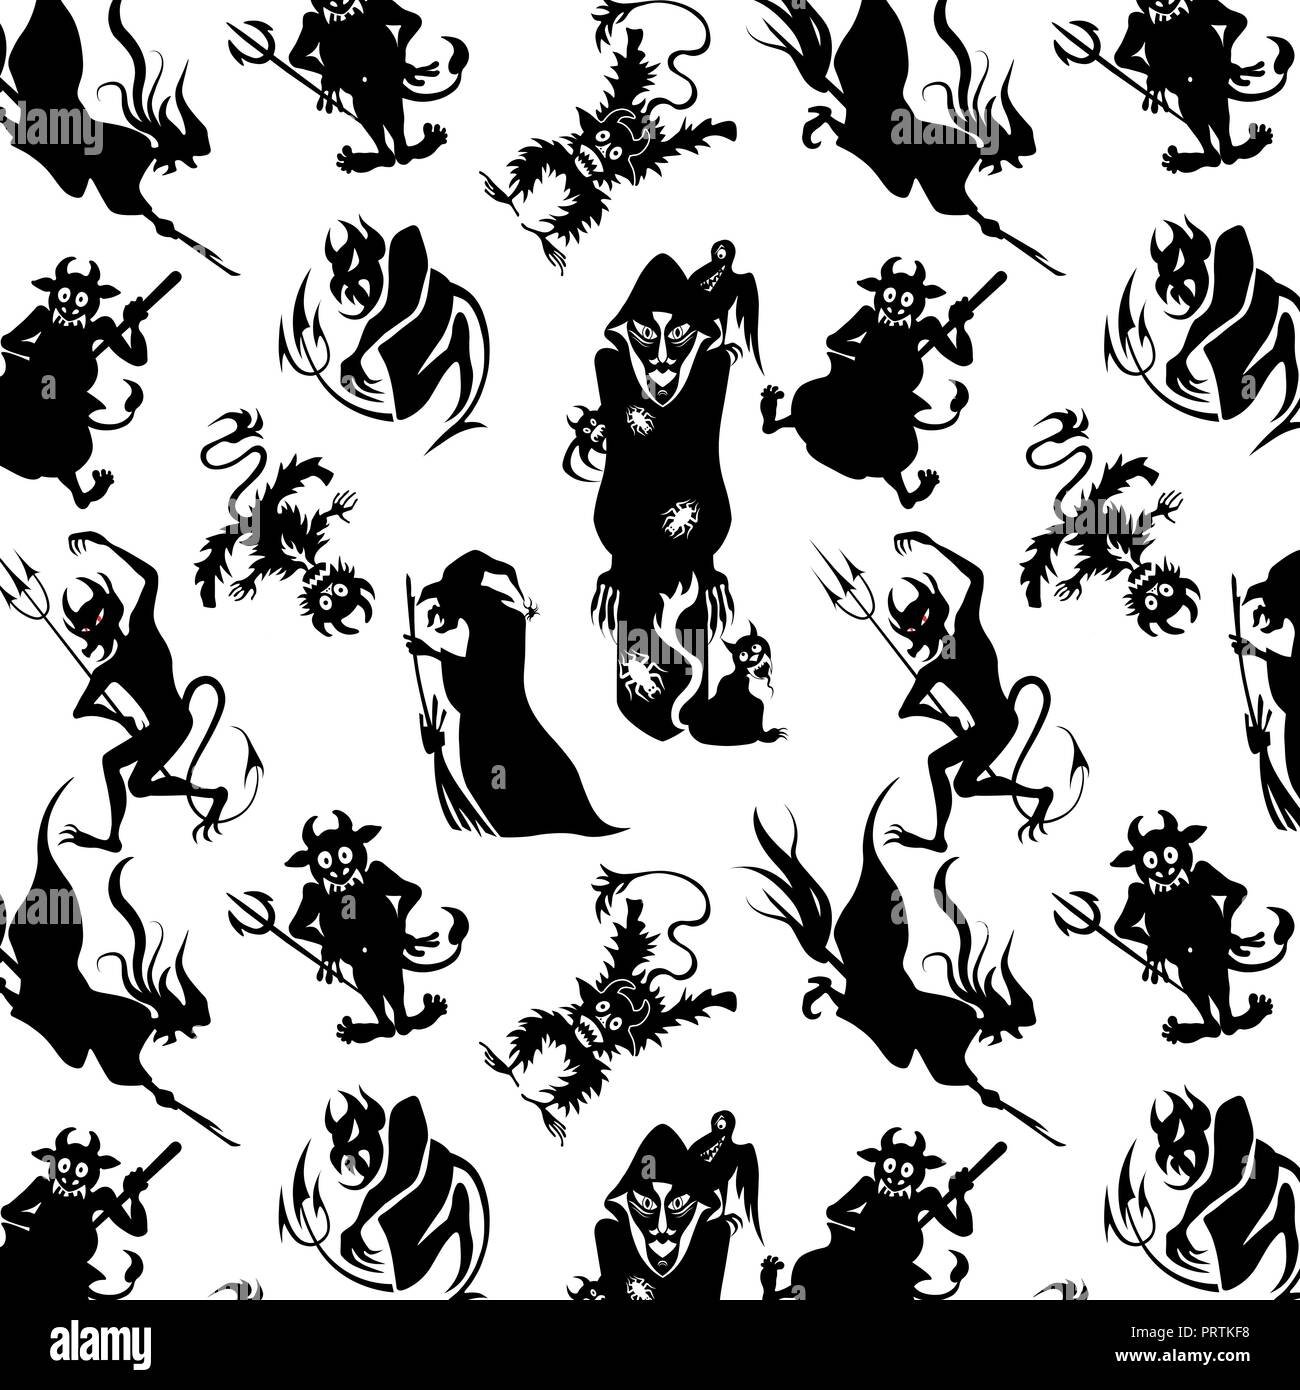 Vector illustration Black and white seamless background abstract pattern for halloween with pumpkin, candy, ghost, spider, bat, witch hat, cat, owl, c Stock Vector